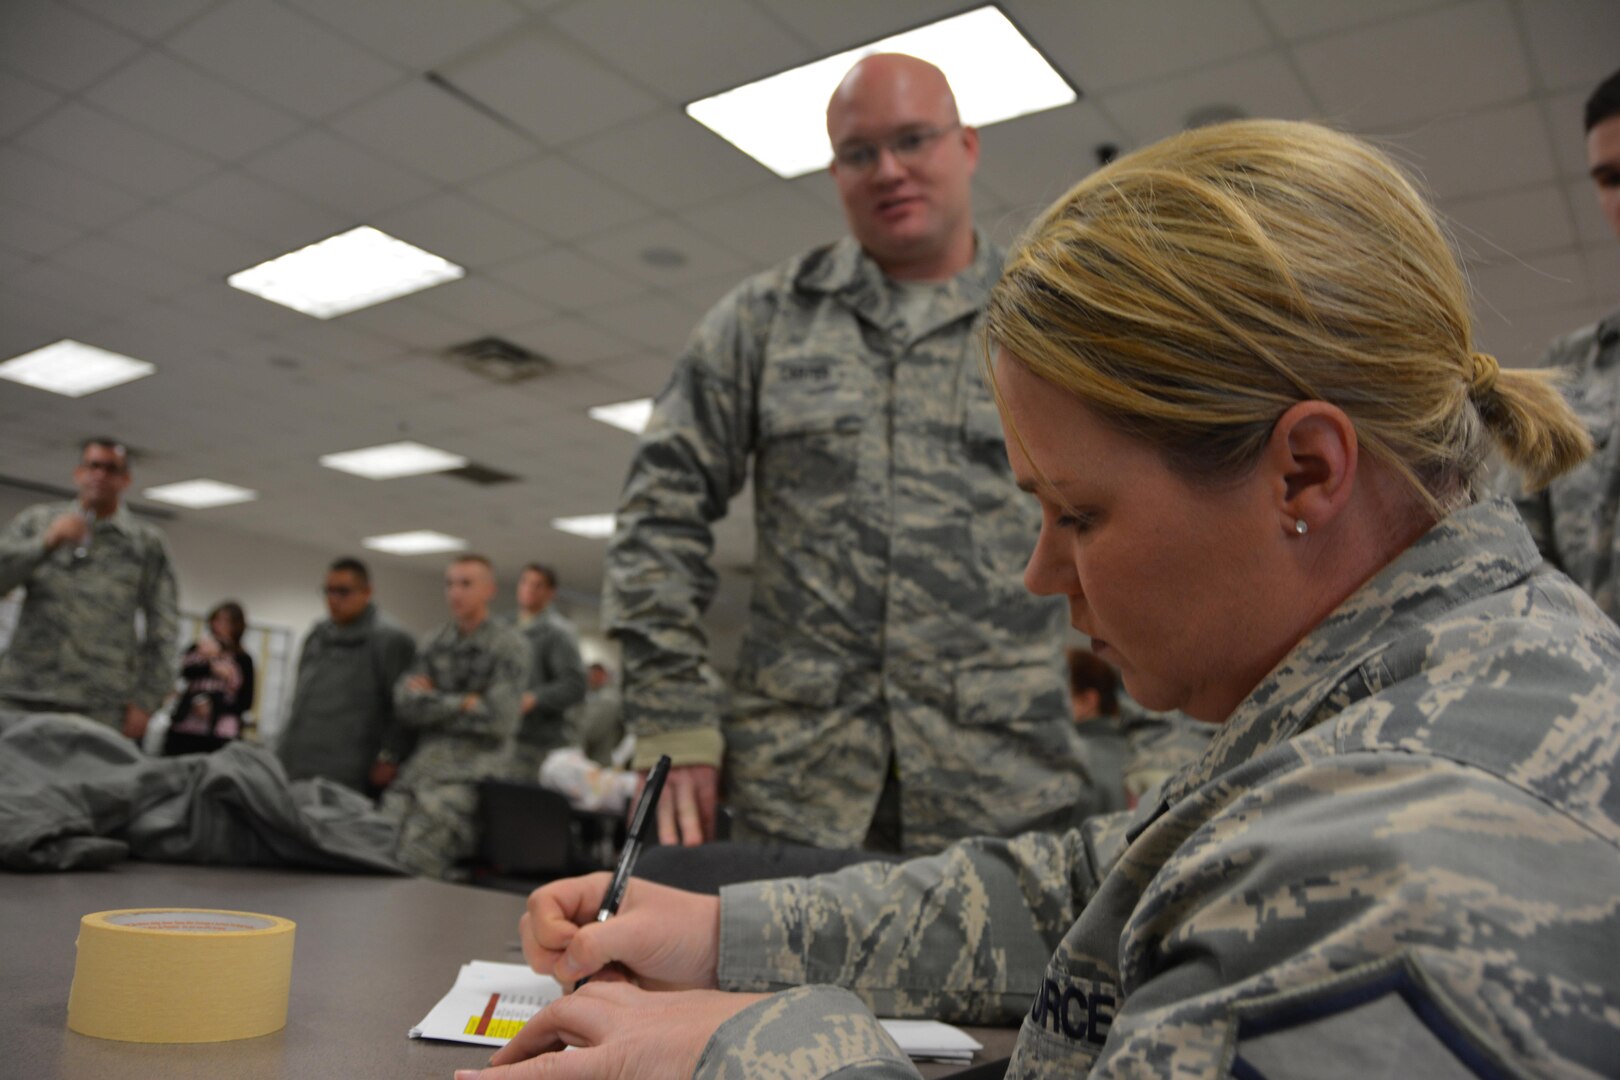 Master Sgt. Angela Vereb, 507th Maintenance Group unit deployment manager scrubs the deployment folder of Staff Sgt. Coty Carter, 507th Aircraft Maintenance Squadron prior to him deploying to Incirlik Air Base, Turkey to support air refueling operations in Southwest Asia December 13, 2016. (U.S. Air Force Photo/Maj. Jon Quinlan)